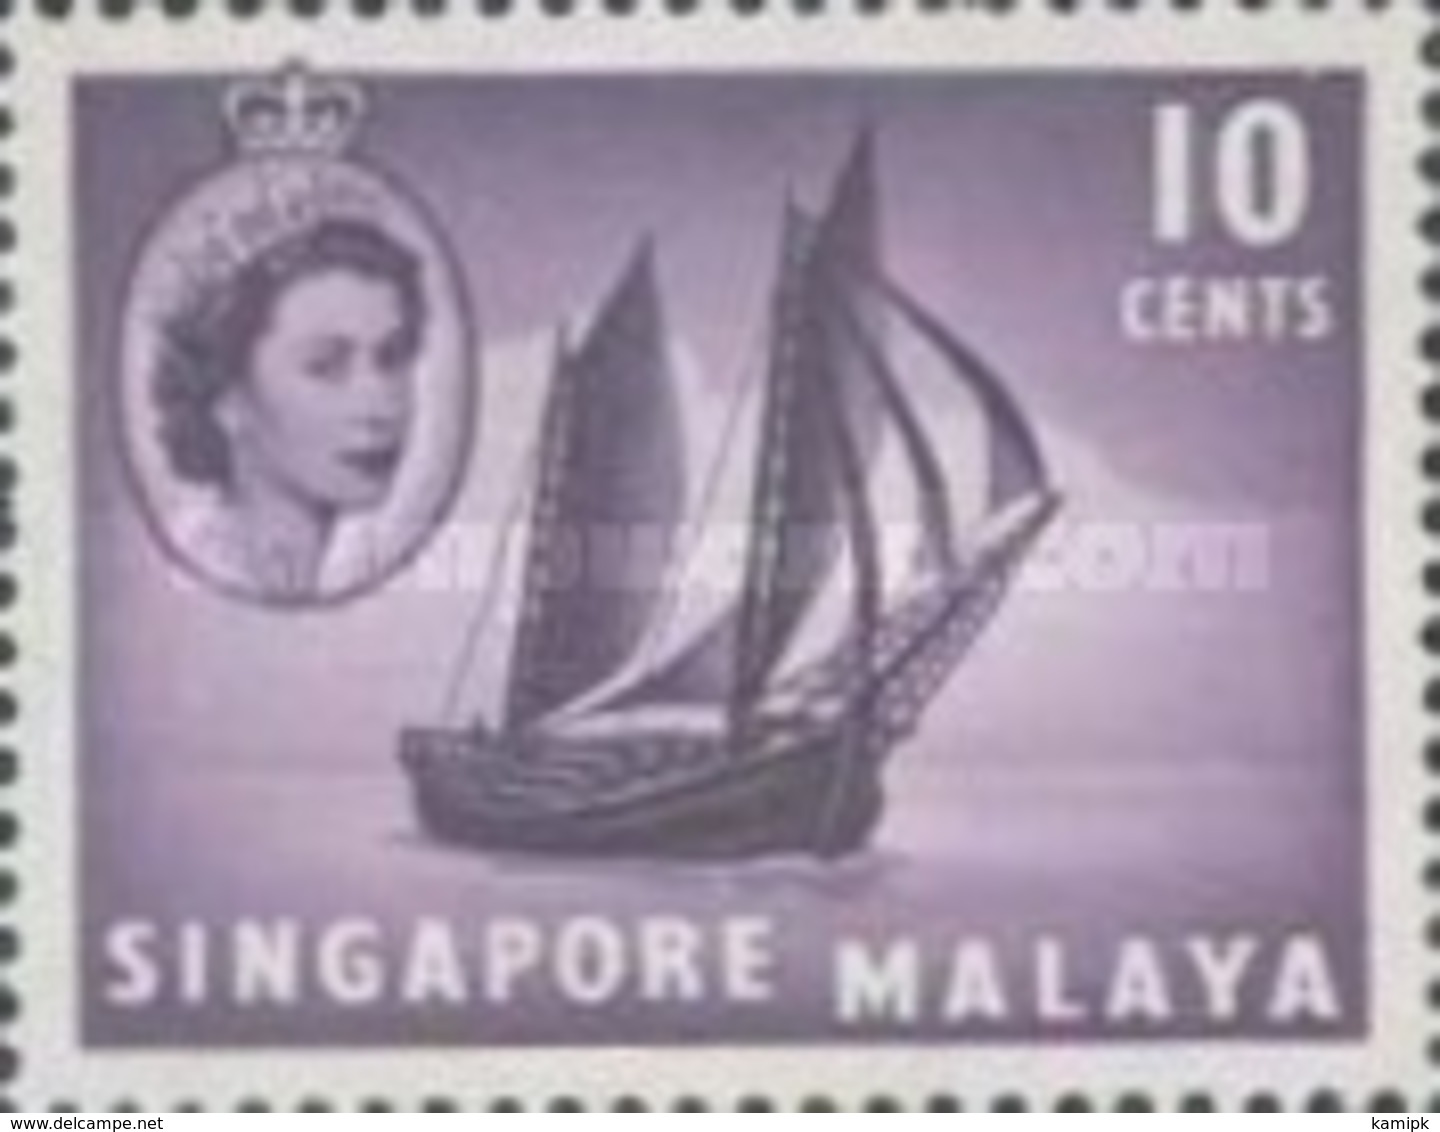 SINGAPORE MALAYA  USED STAMPS  Queen Elizabeth II, Ships And Other Image-1955 - Singapore (1959-...)